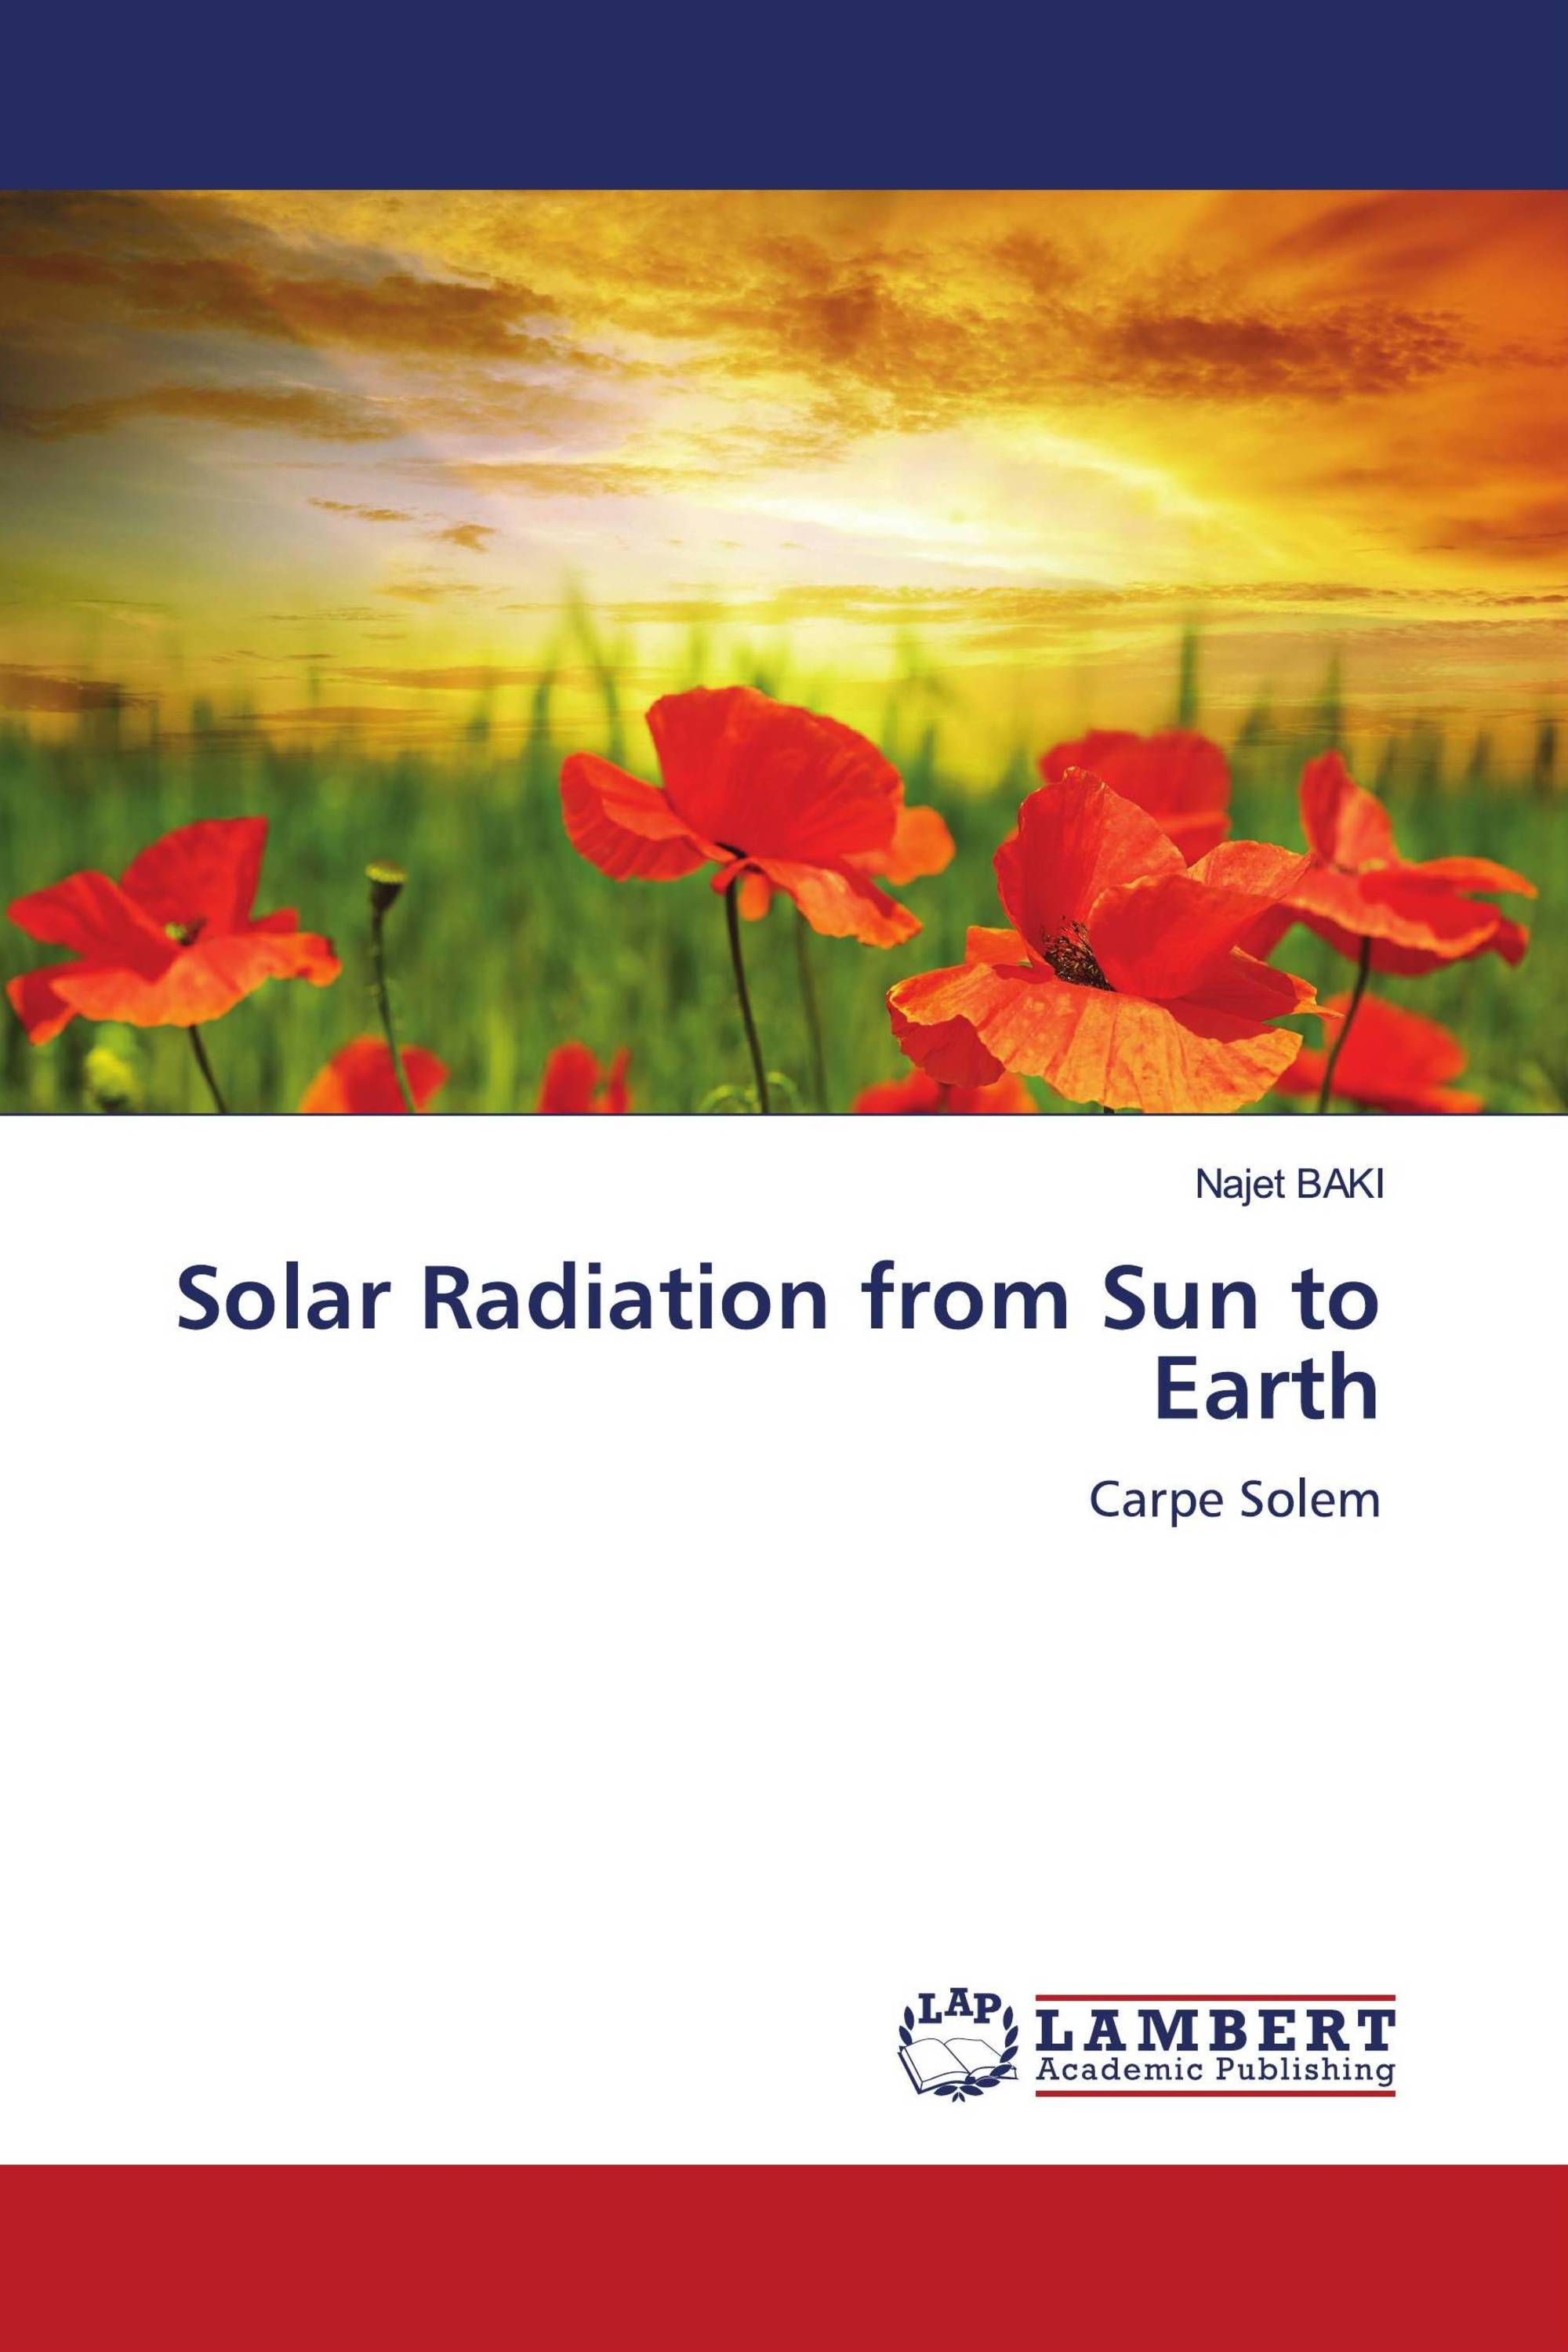 Solar Radiation from Sun to Earth